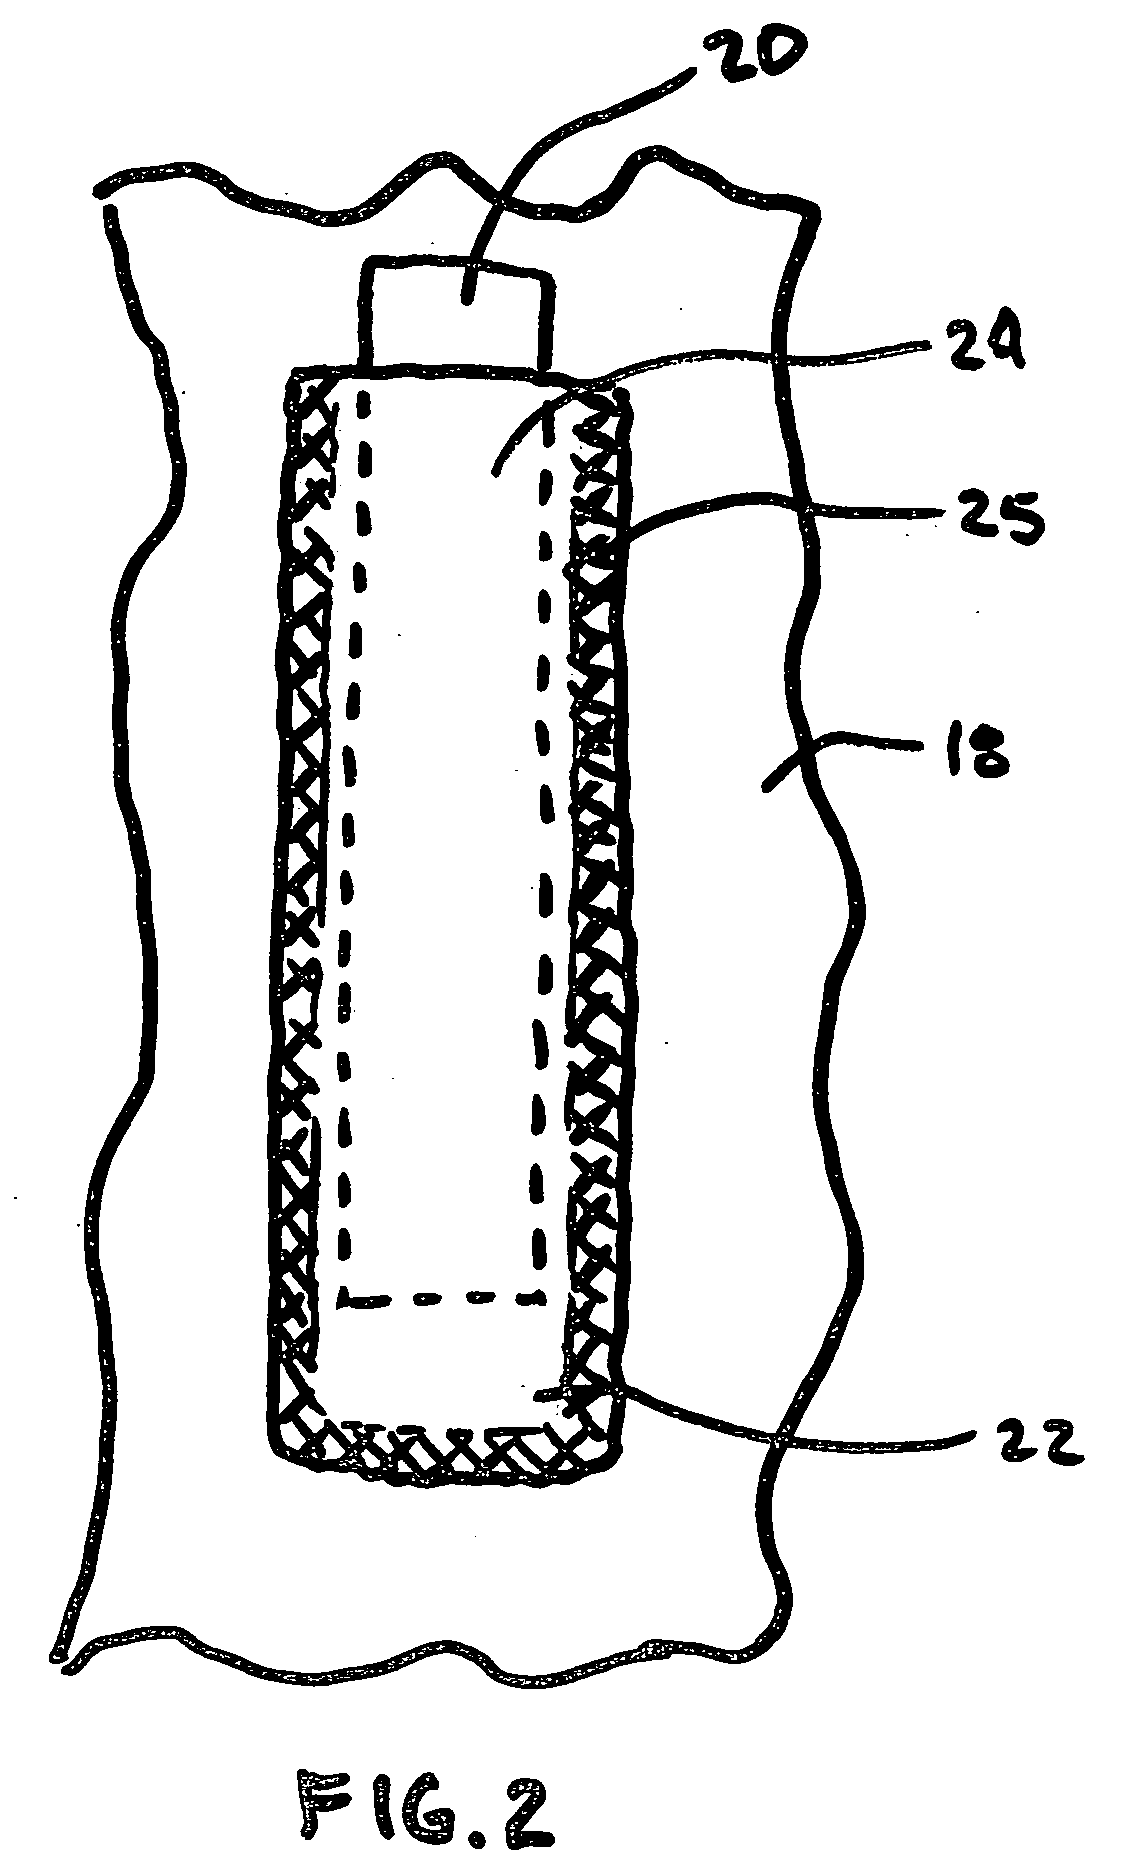 Protective garment containing malleable insert